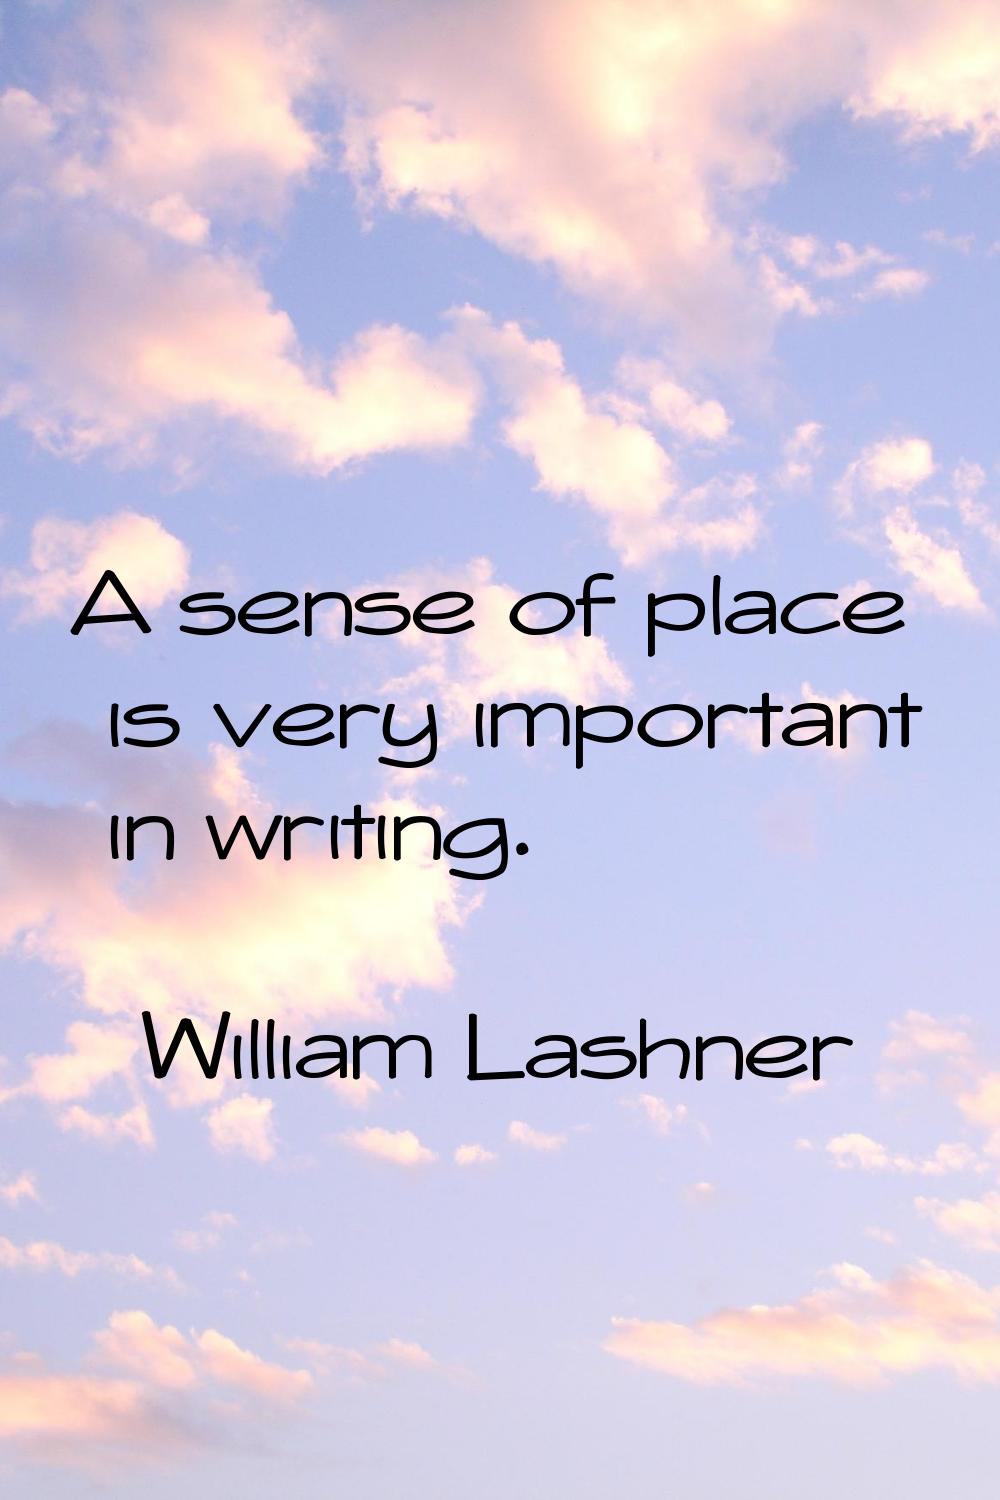 A sense of place is very important in writing.